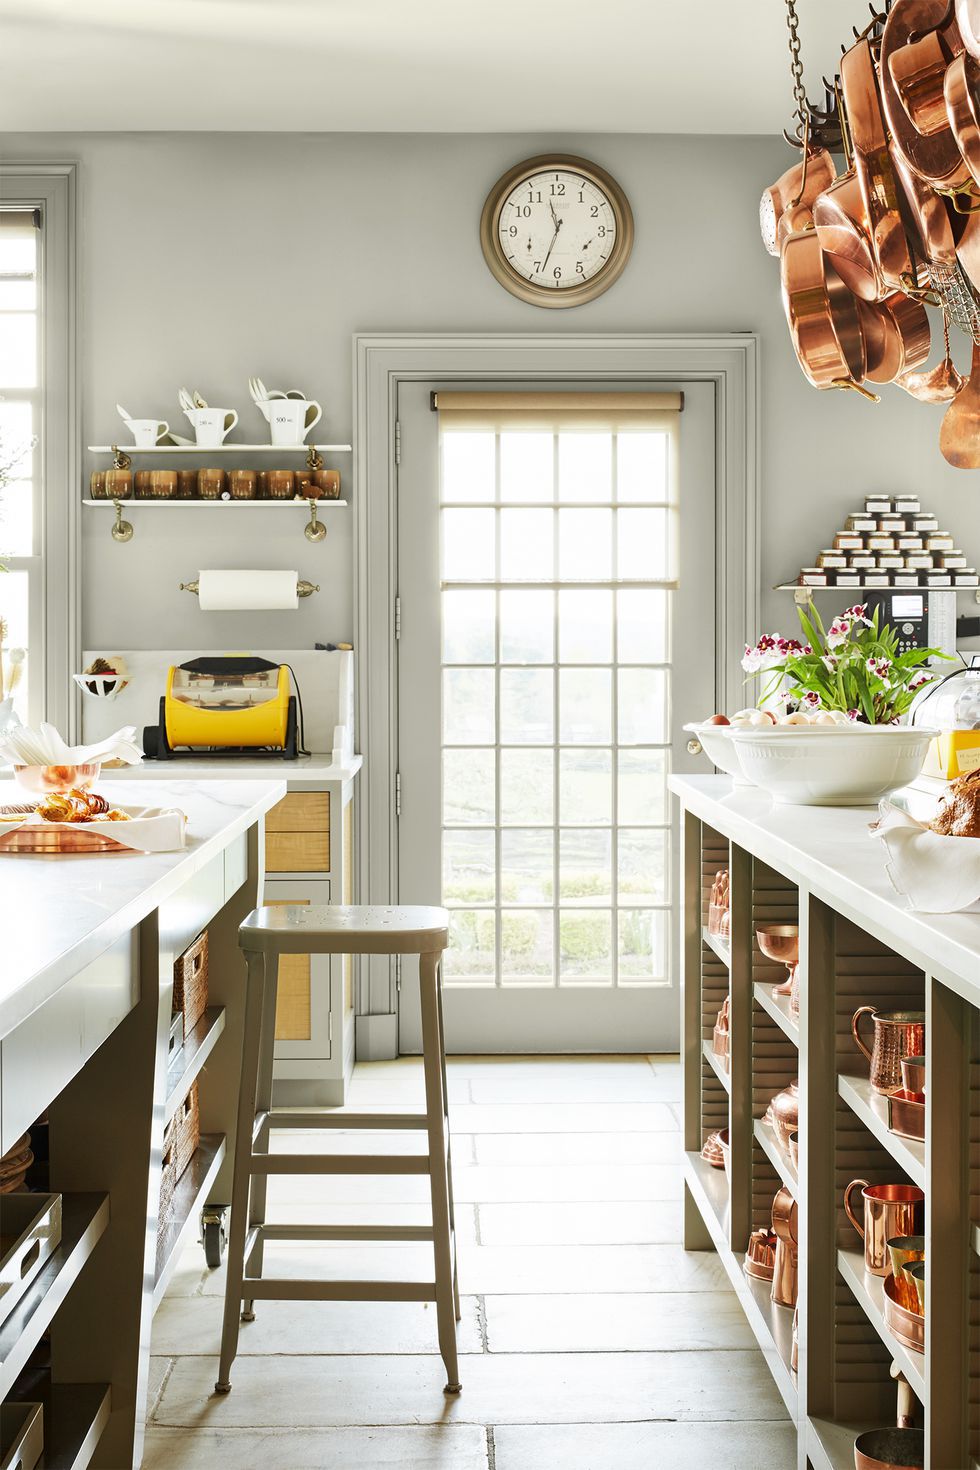 15 Gorgeous Kitchen Trends for 2019 - New Cabinet and Color Design Ideas